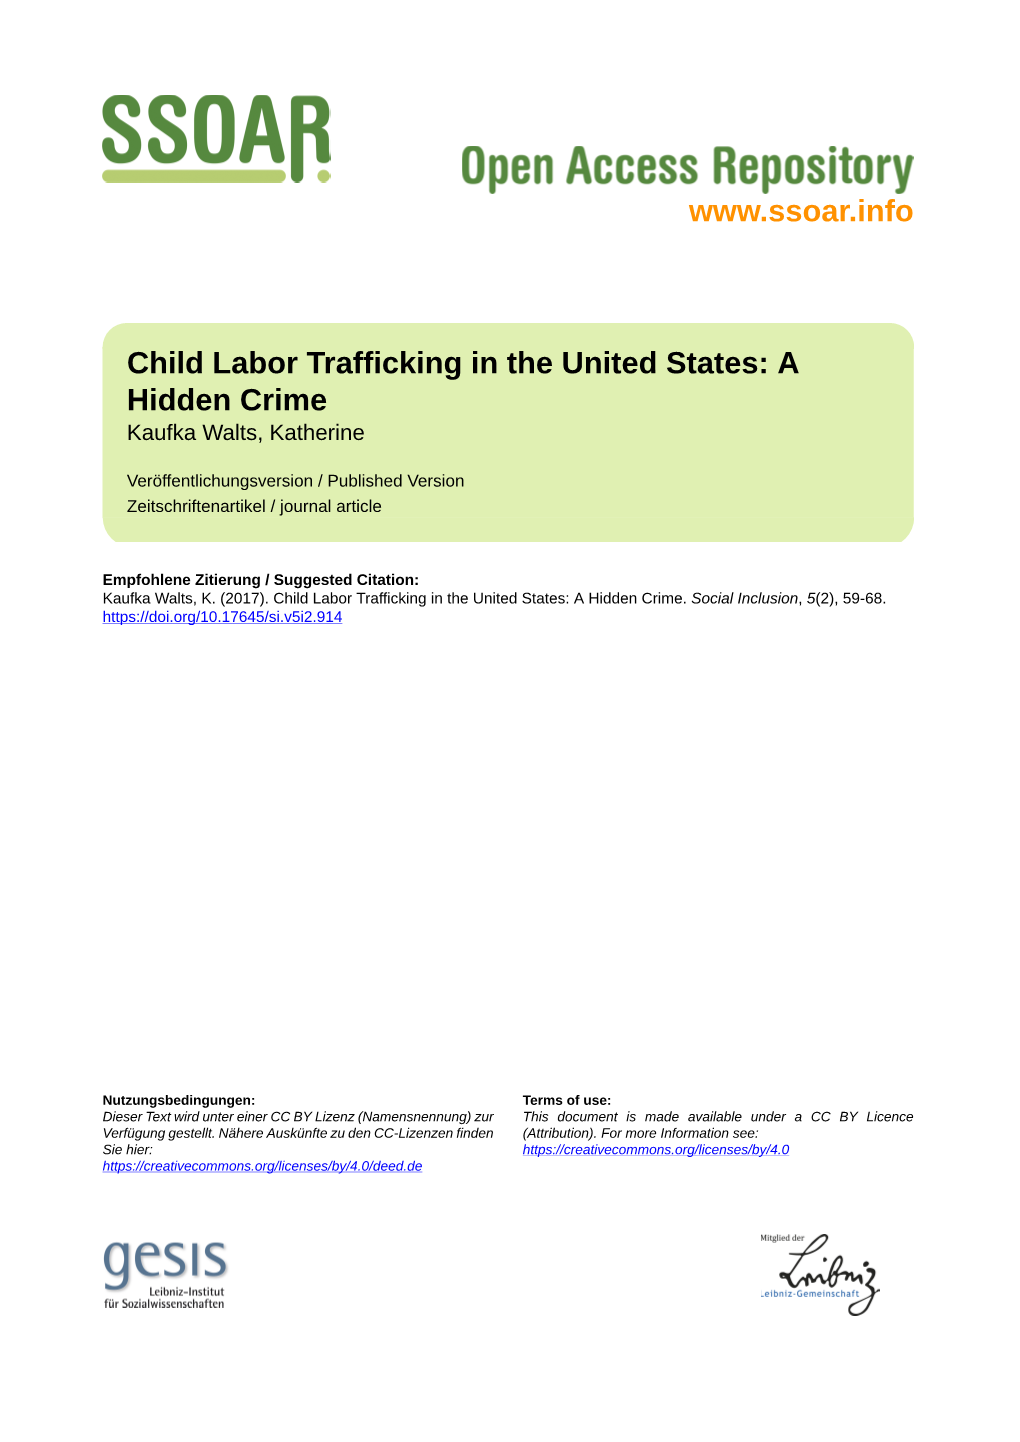 Child Labor Trafficking in the United States: a Hidden Crime Kaufka Walts, Katherine